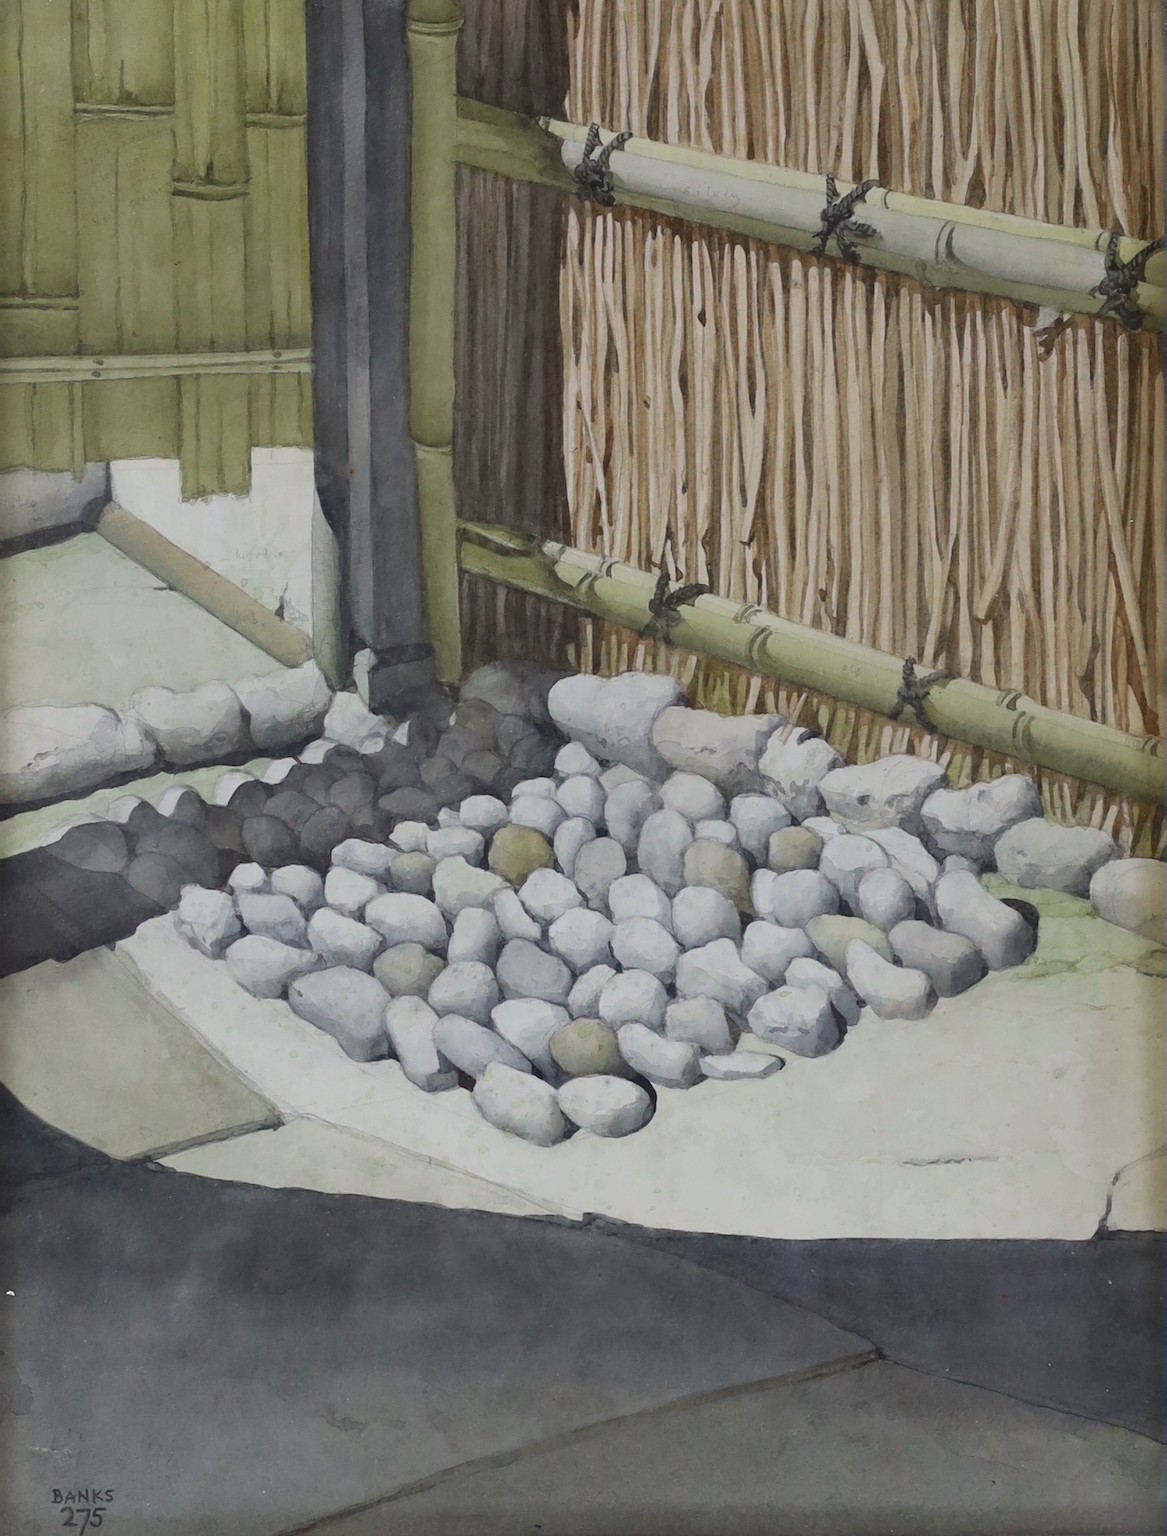 Robert Banks (1911-2001), watercolour, 'In a Ryokan; Gion', signed and numbered 275 with Trafford Gallery label verso, 33.5 x 25.5cm